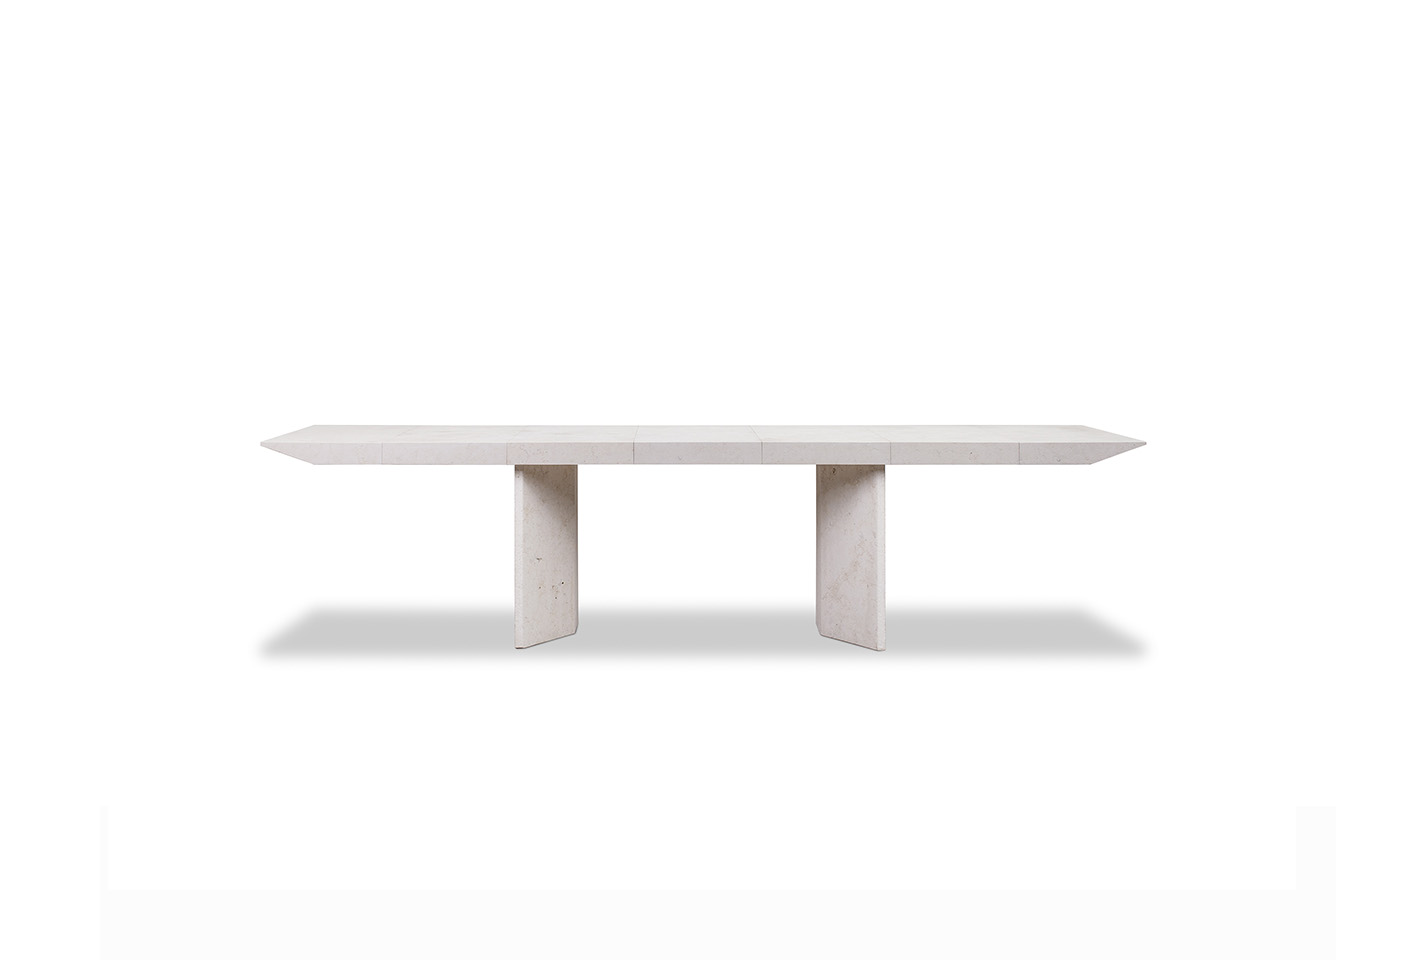 The Judd table designed by Baxter. Photo c/o Baxter.